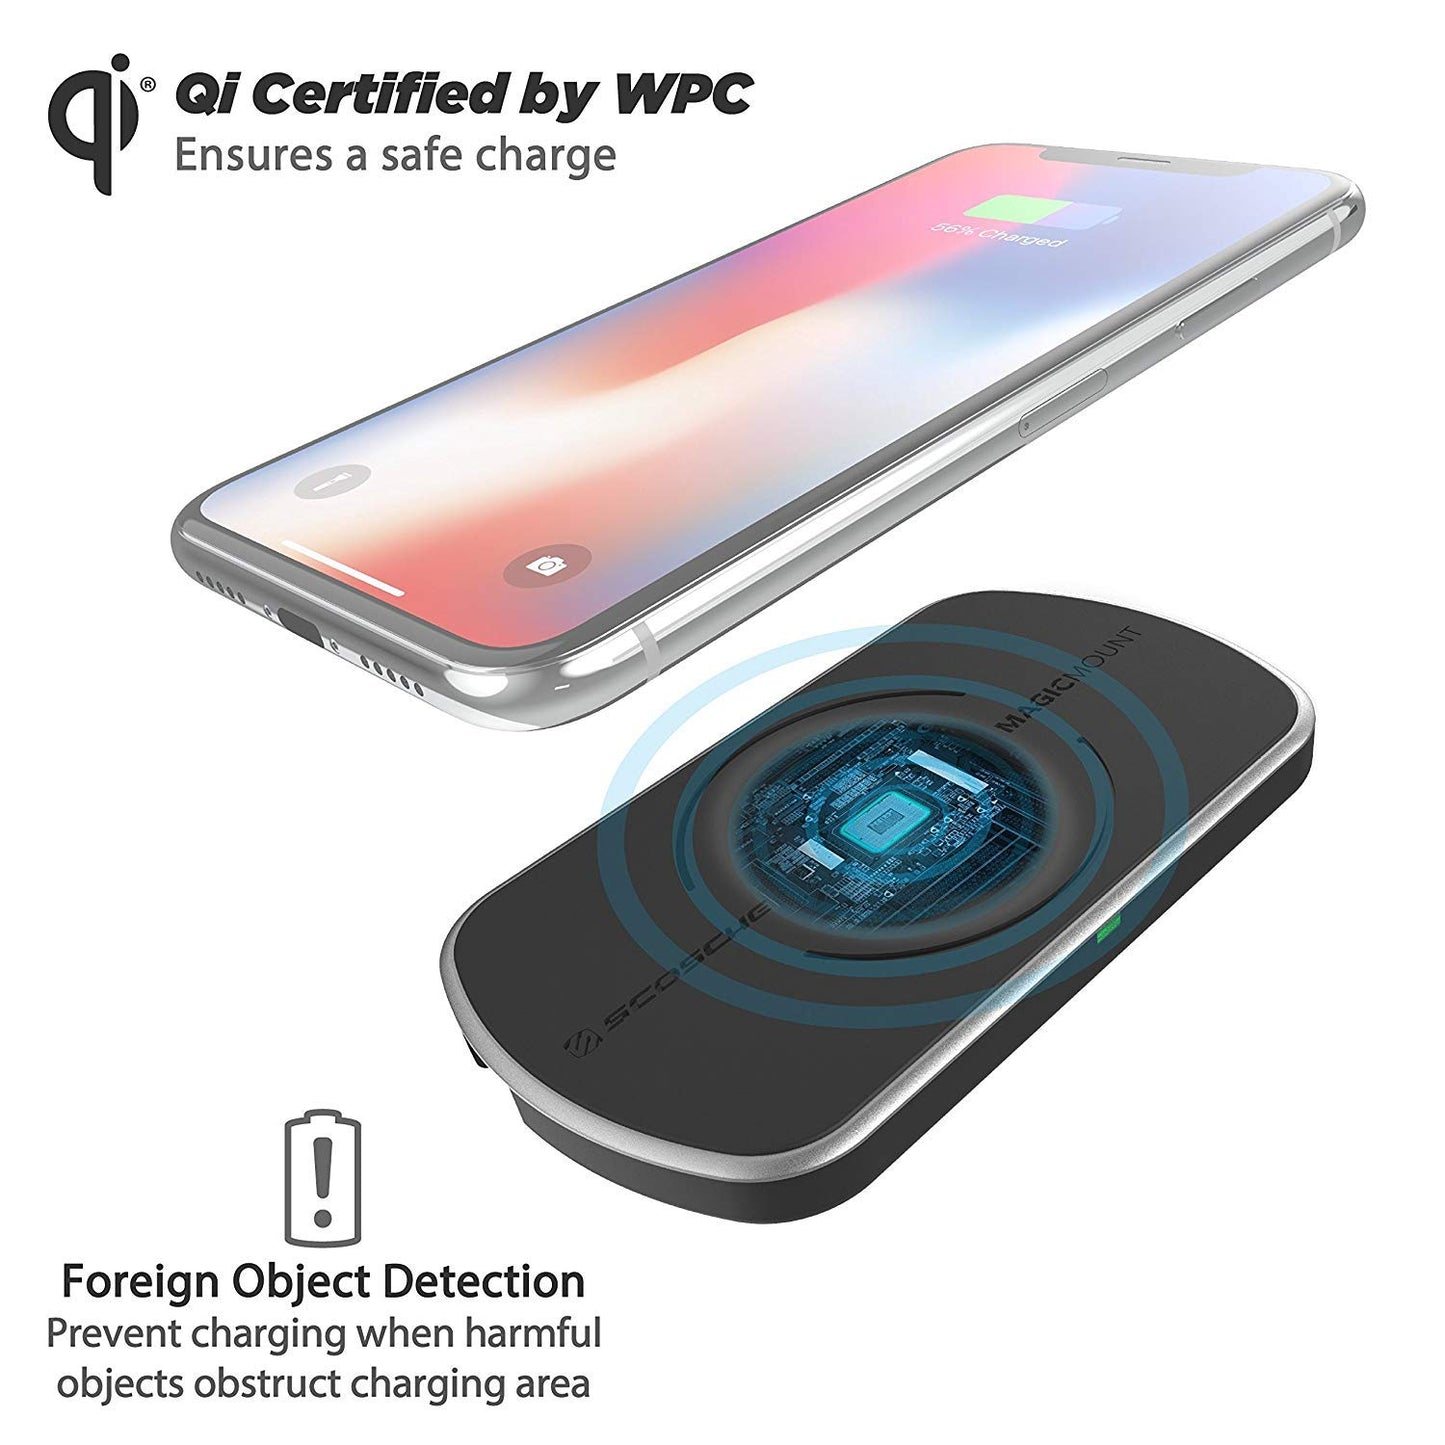 MagicMount Pro - Wireless Charging Magnetic Surface Mount